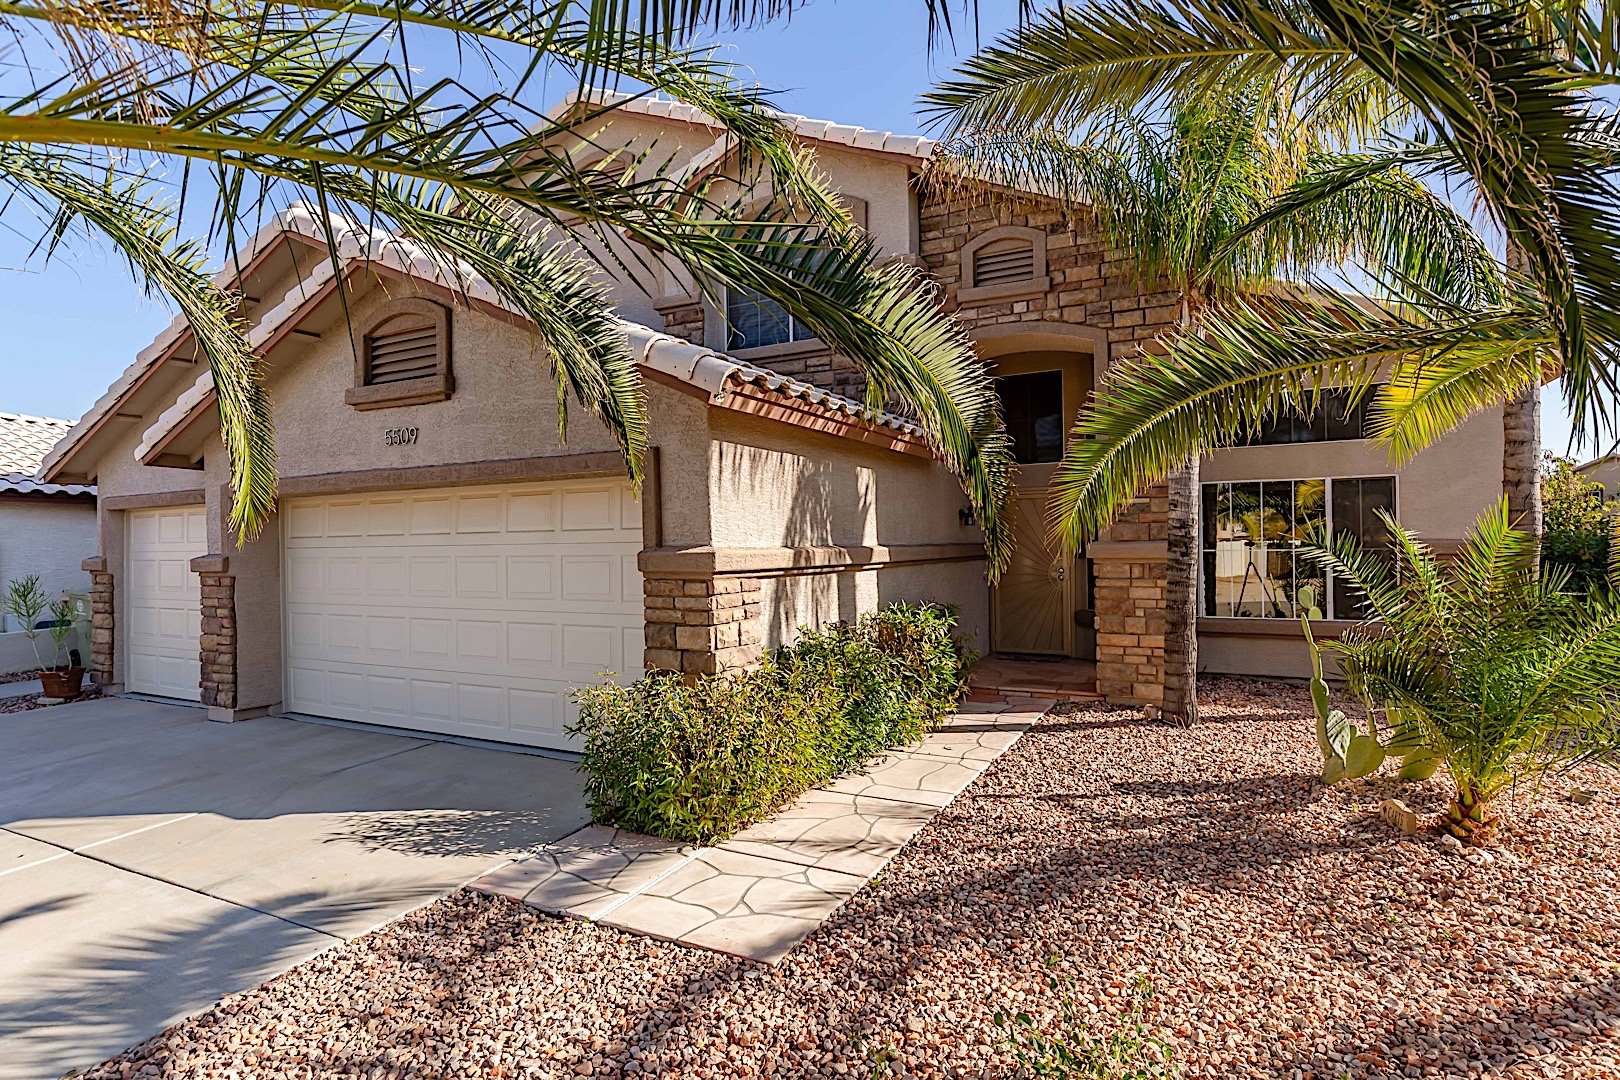 Step into the world of tropical palm trees on Piute Dr.